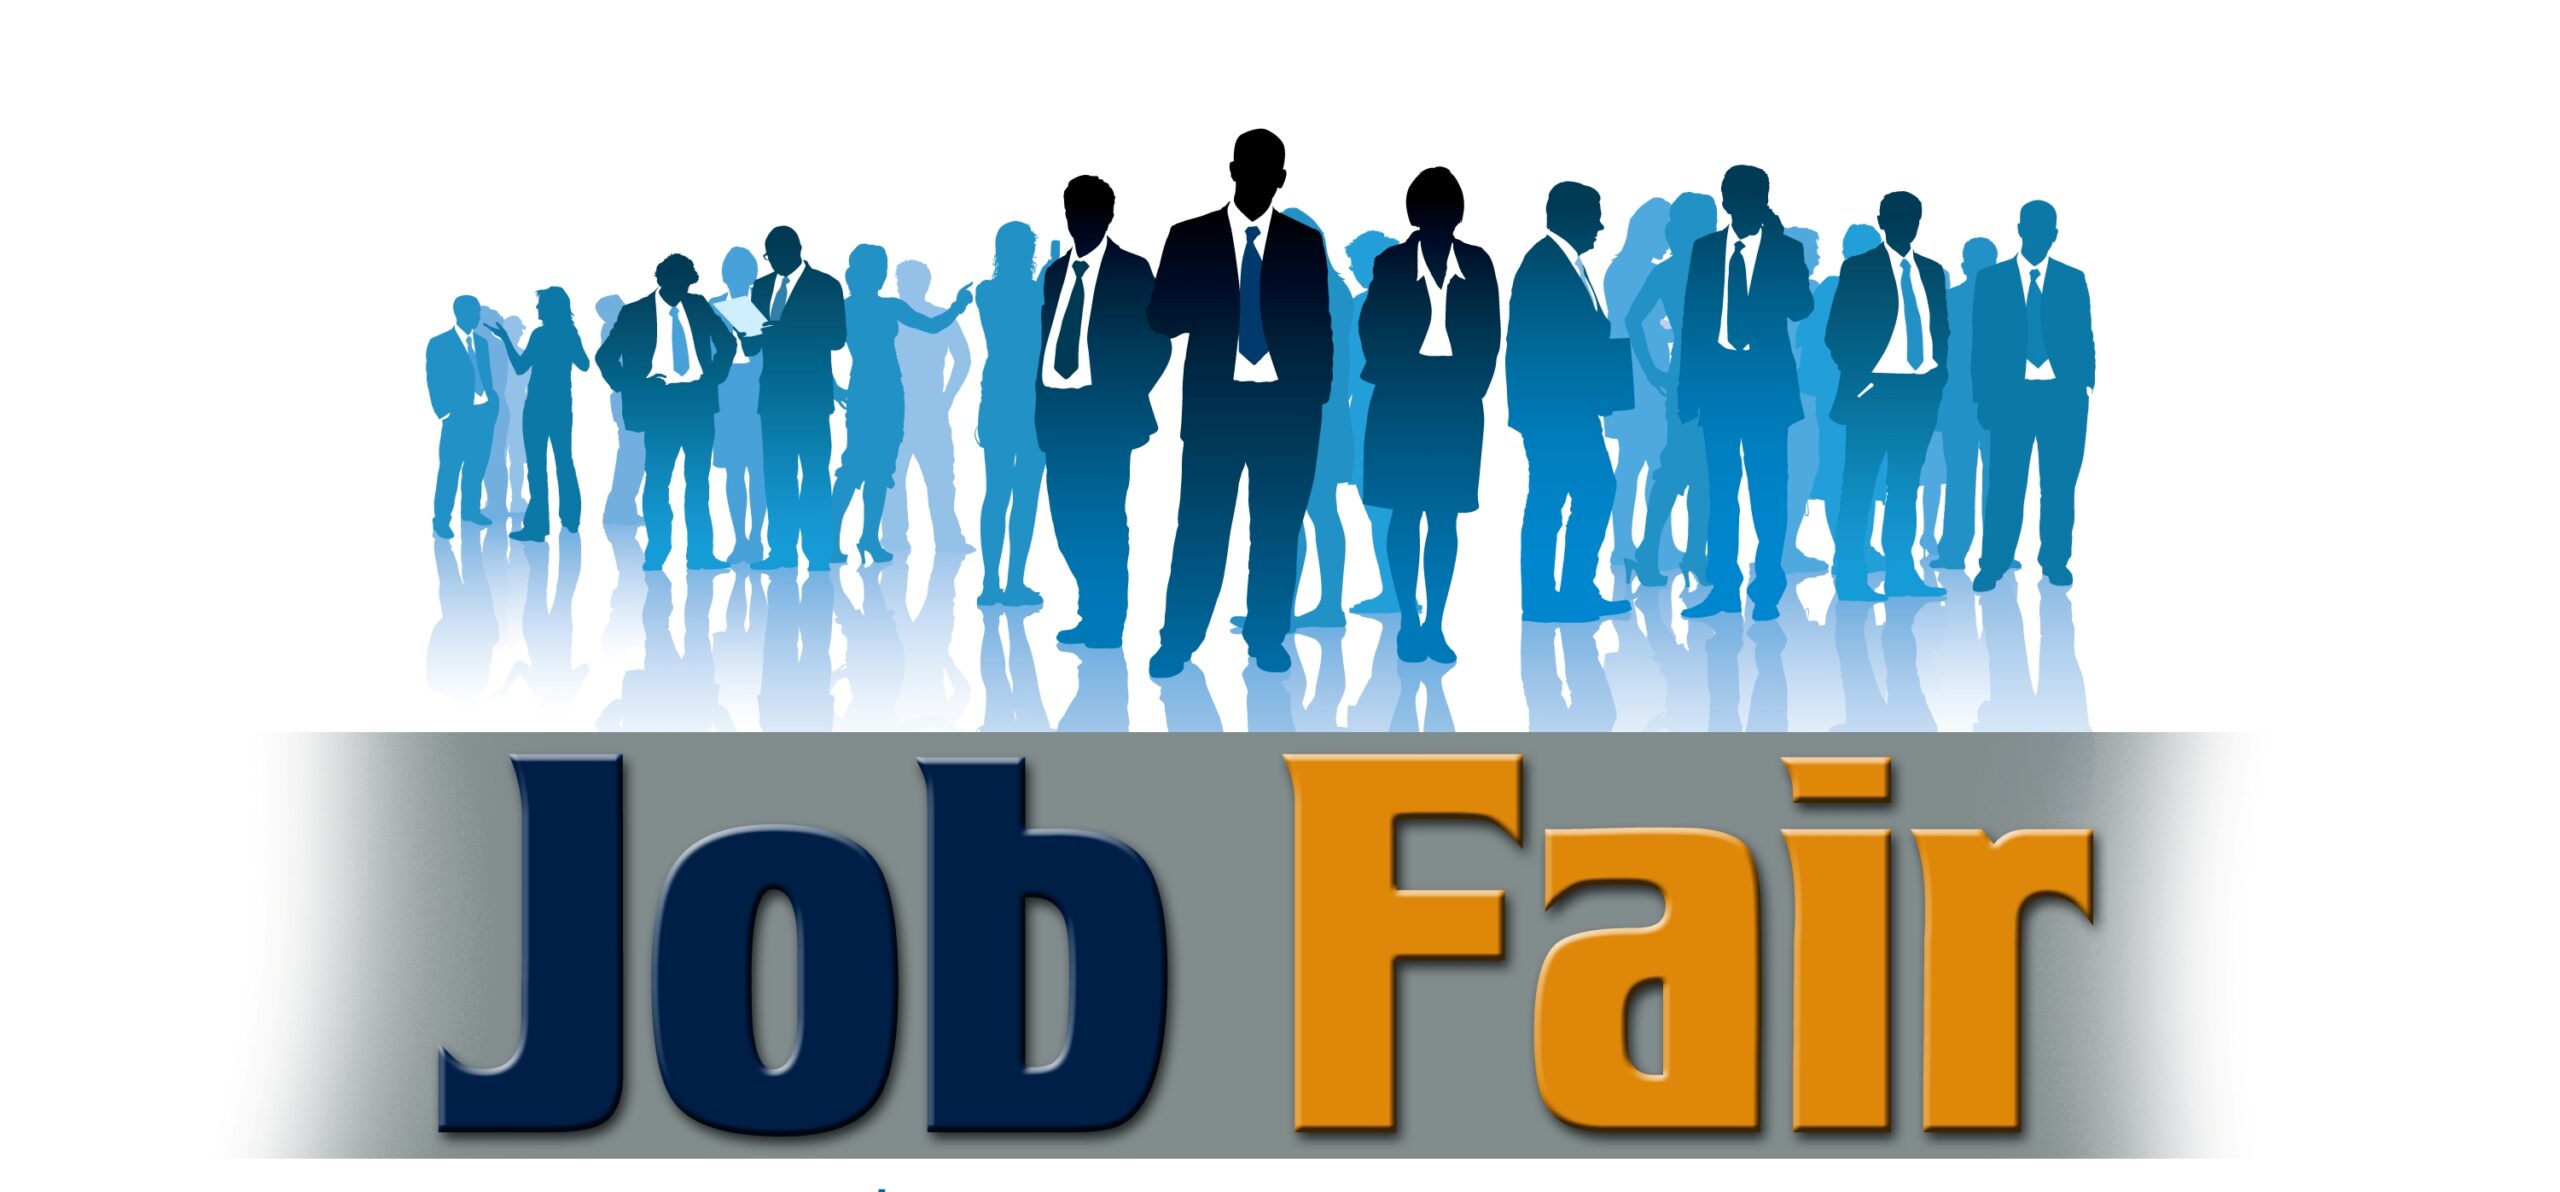 Bihar Job Fair: Mega Employment fair to hold in Gaya from Dec 19-20, B.Tech, MBA, and Hotel Management students to also get a chance